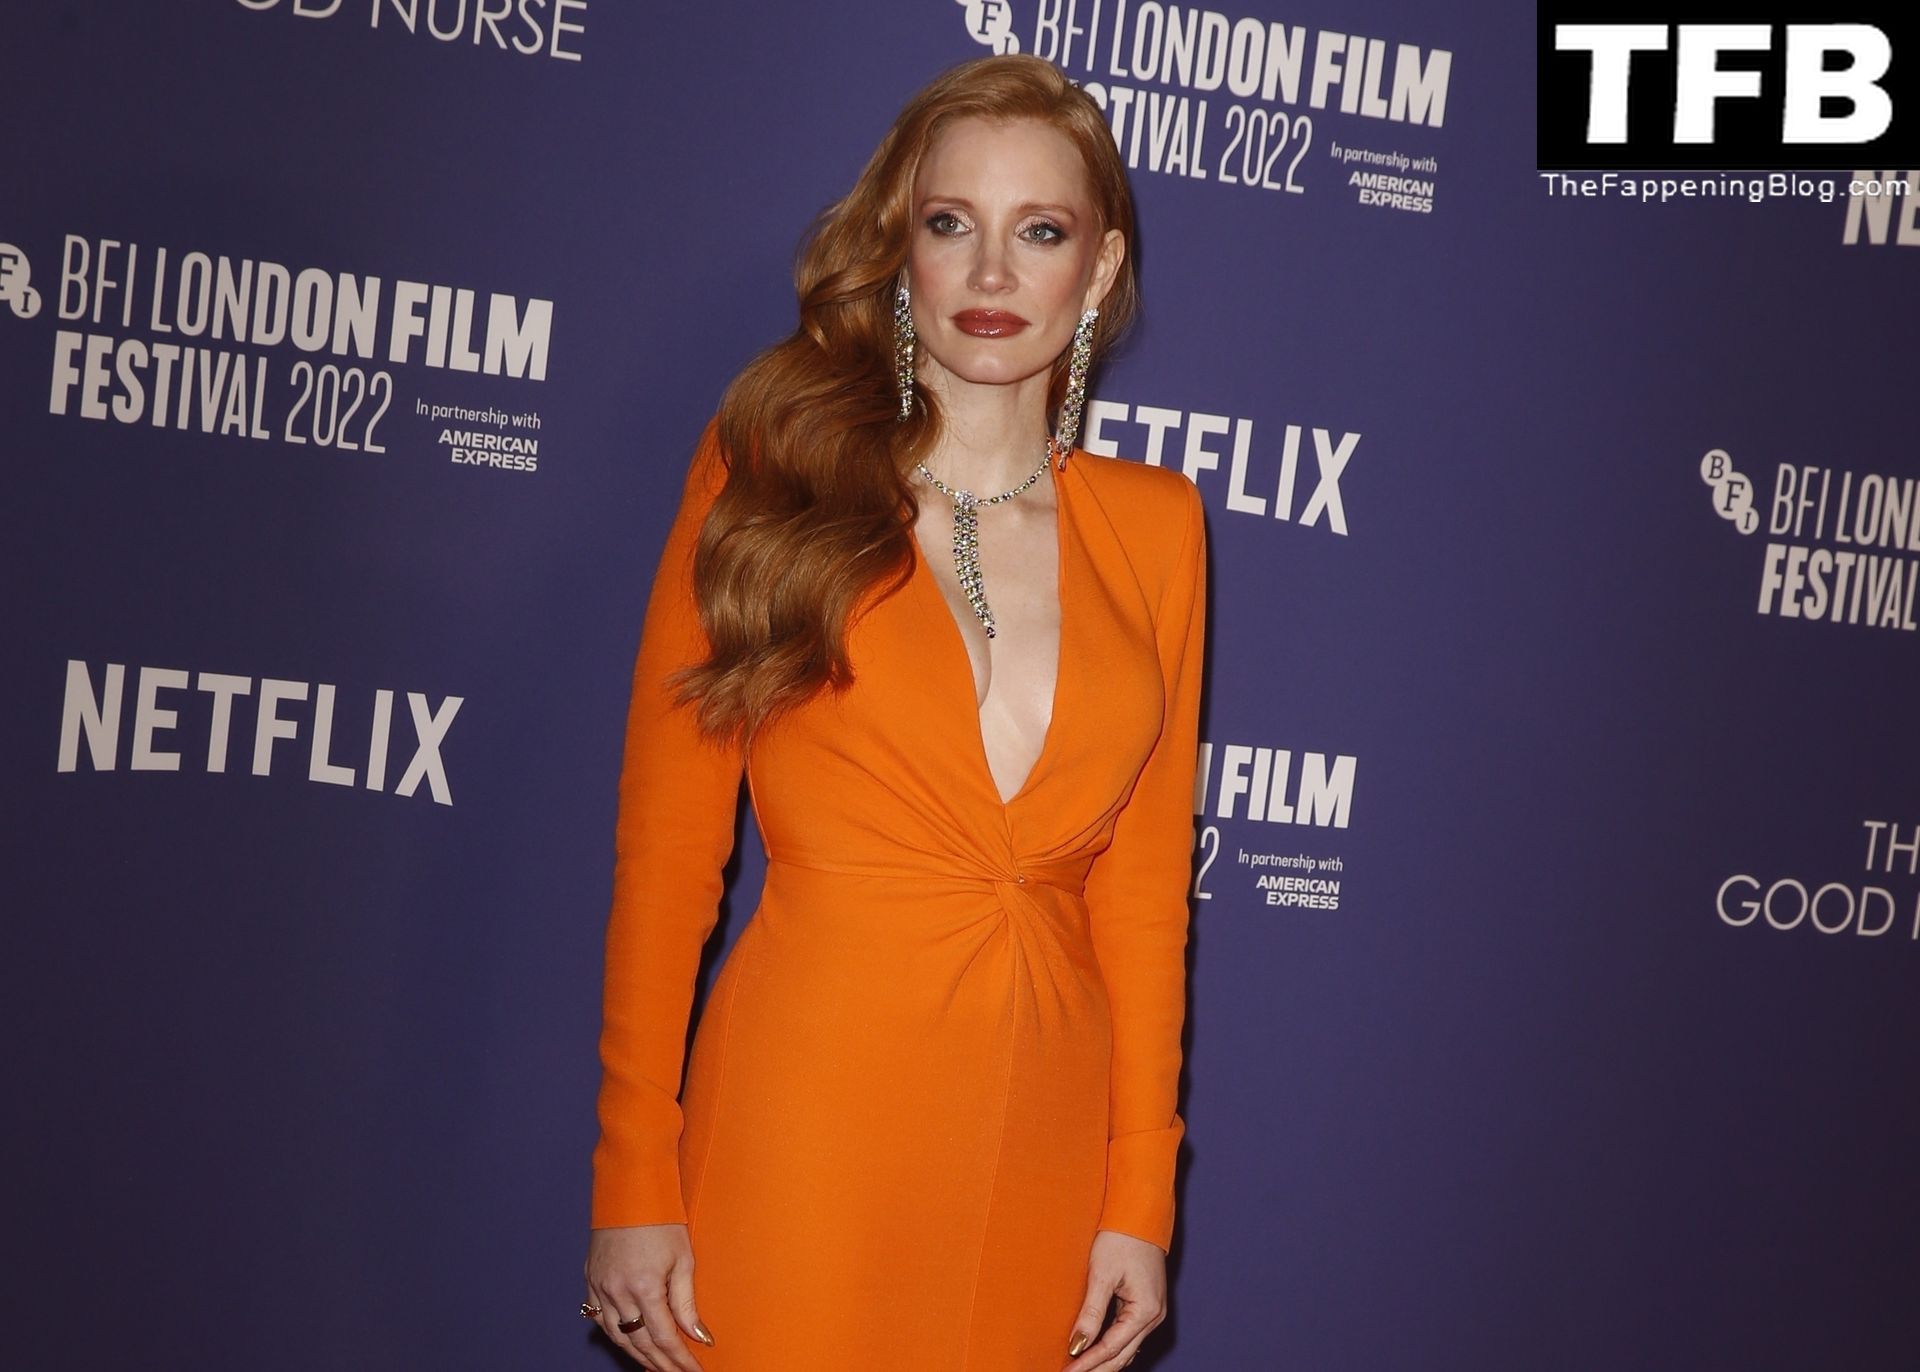 Jessica Chastain Sexy The Fappening Blog 75 - Jessica Chastain Poses for Photographers Upon Arrival for the Premiere of the Film “The Good Nurse” in London (150 Photos)